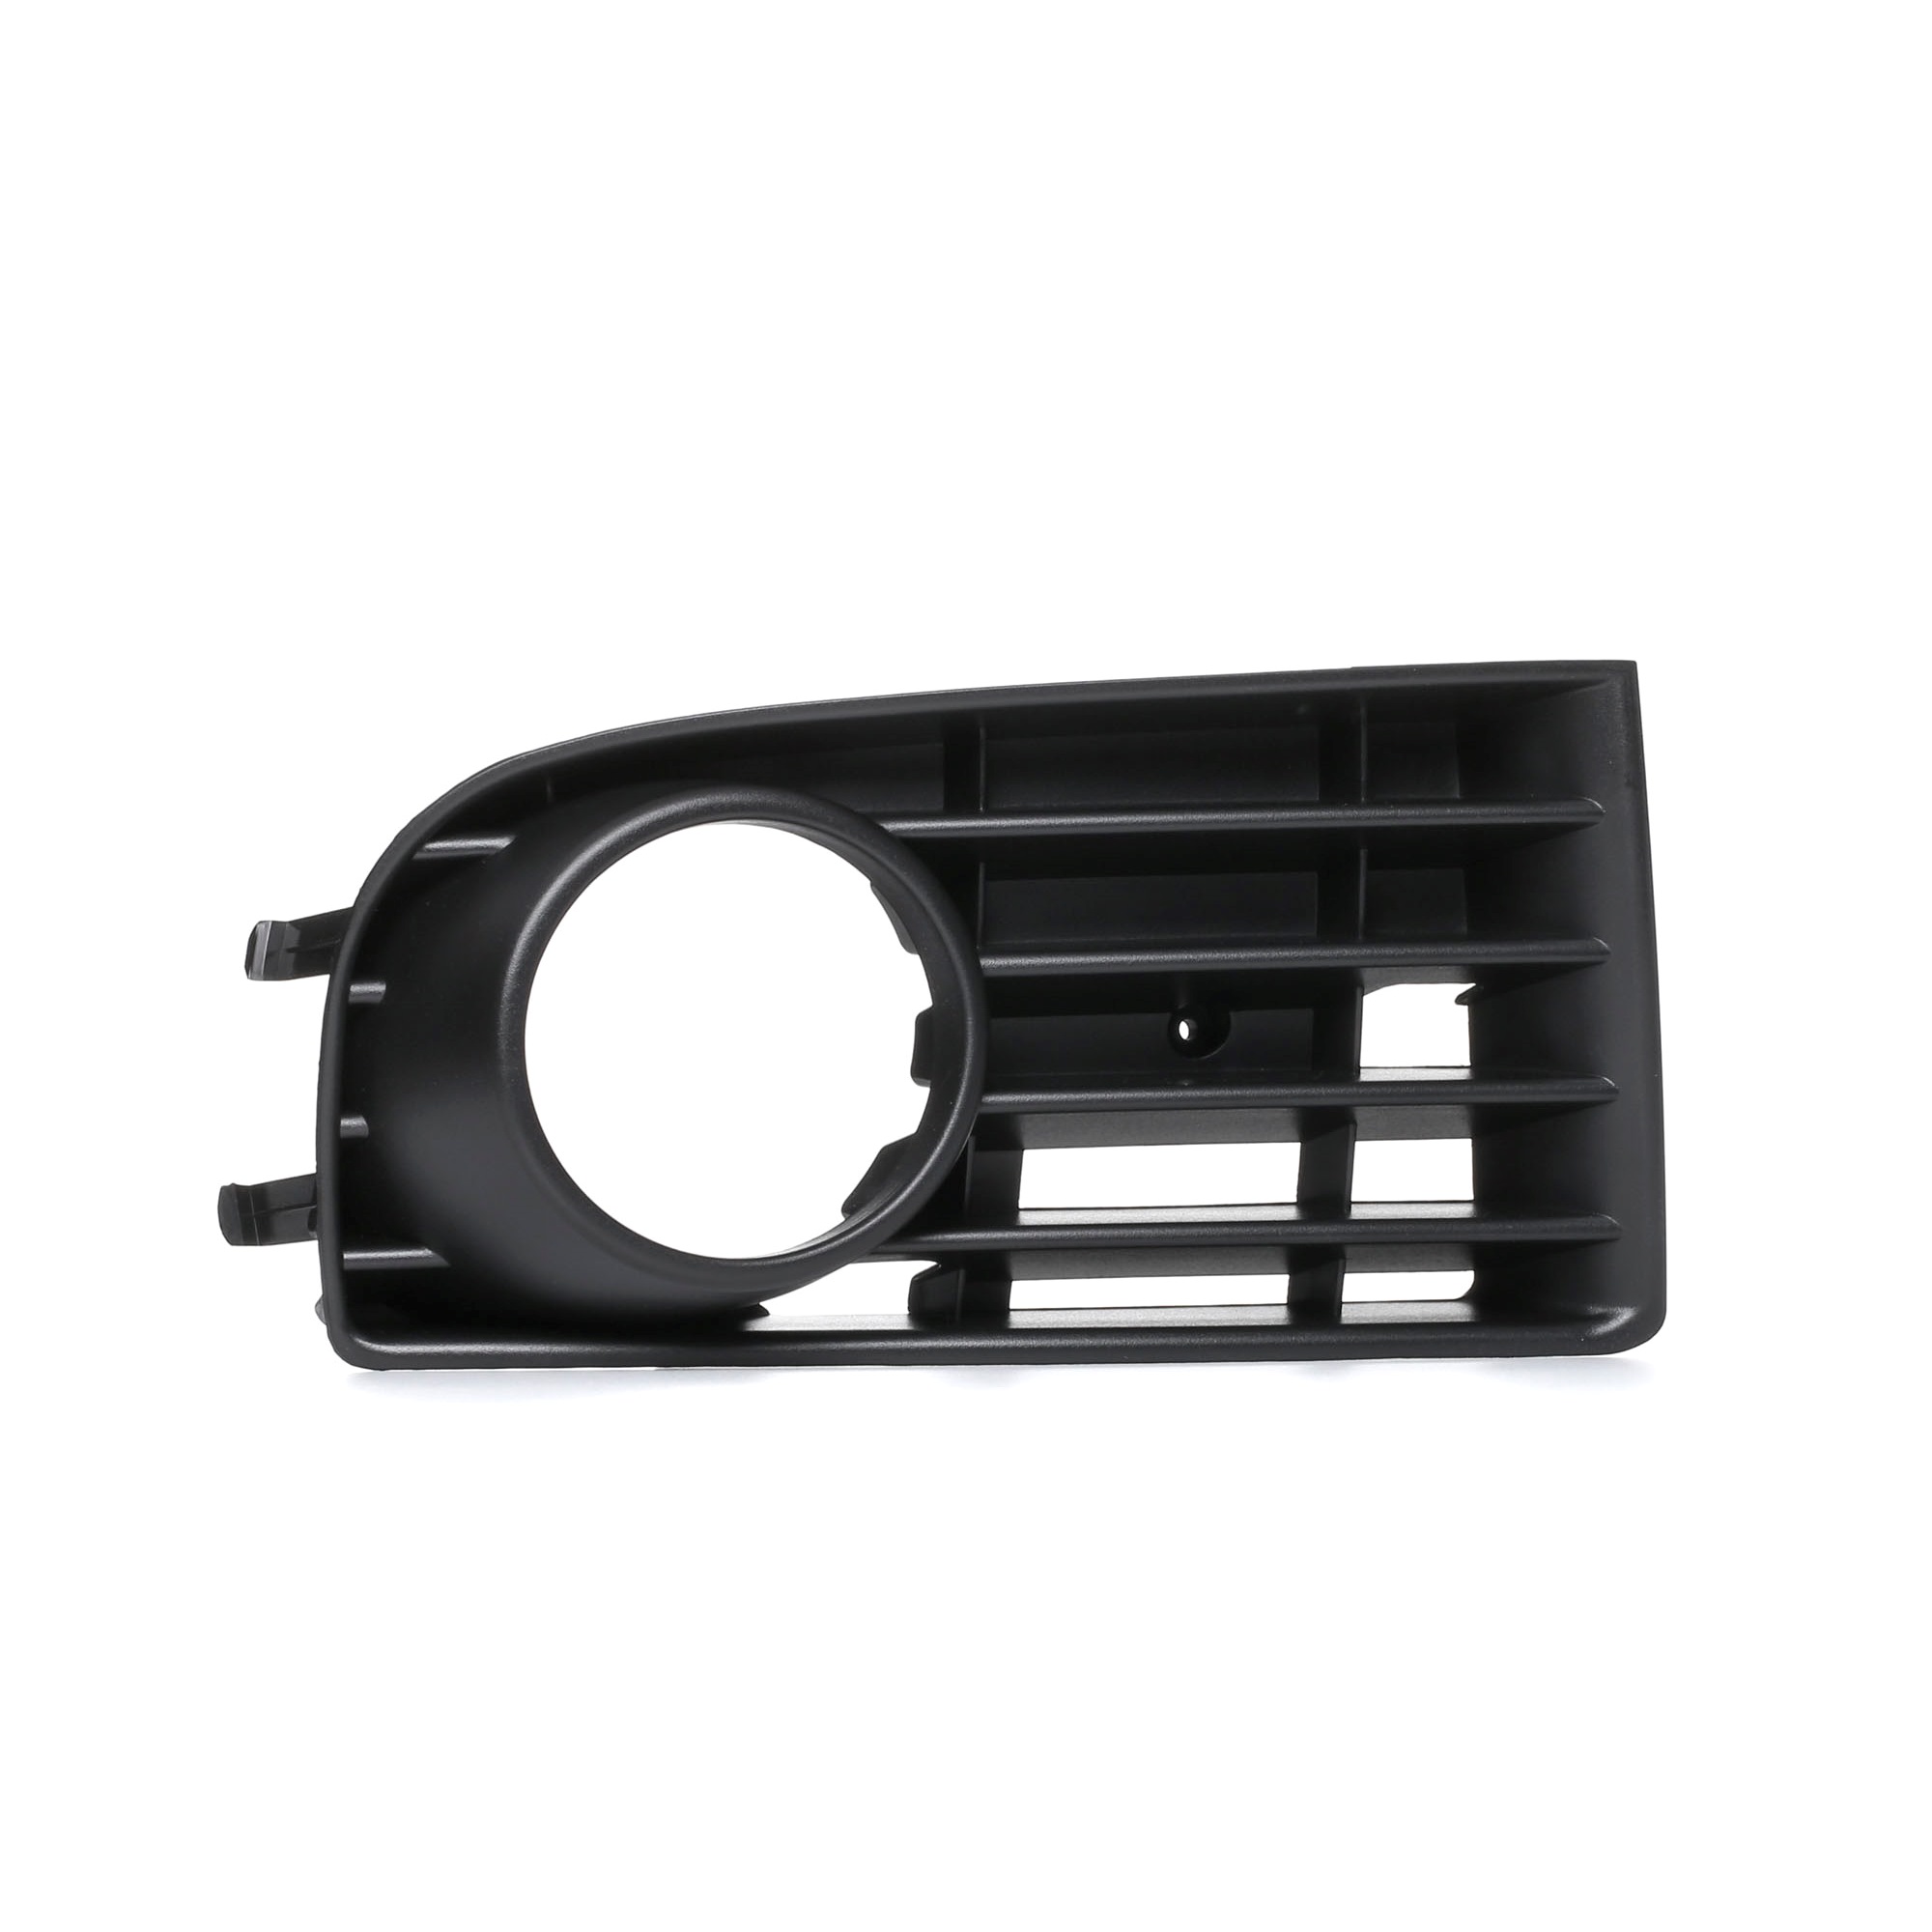 BLIC 6502-07-9524996P Bumper grill with hole(s) for fog lights, Fitting Position: Right Front